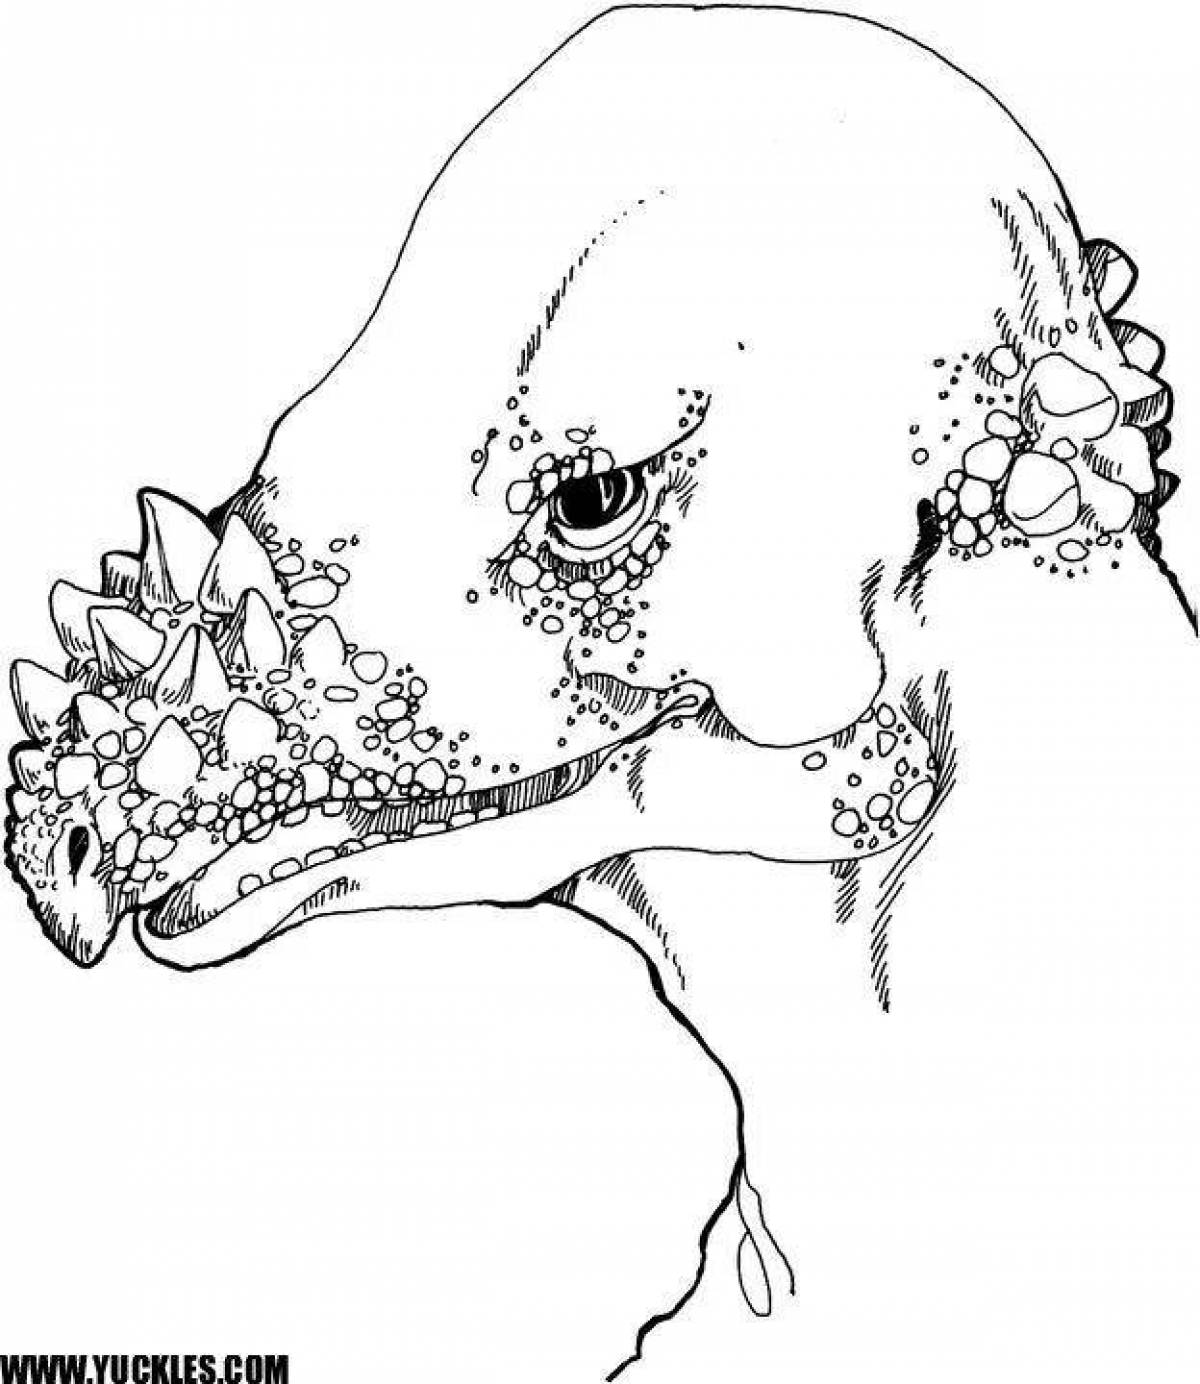 Coloring page funny pachycephalosaurus